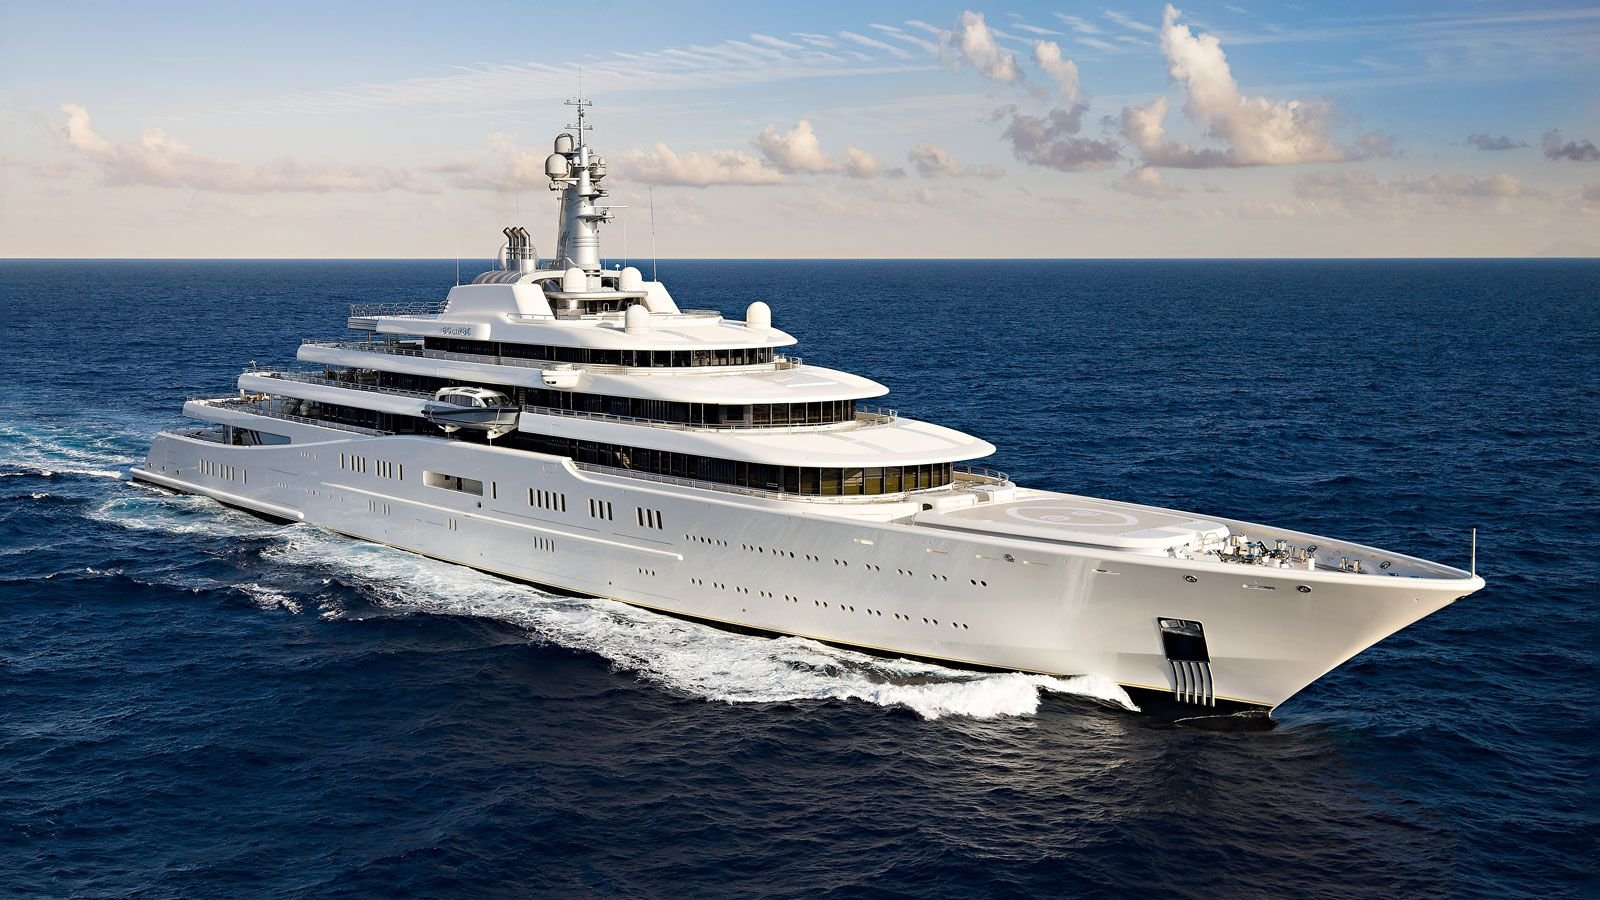 The Eclipse, luxurious superyacht 